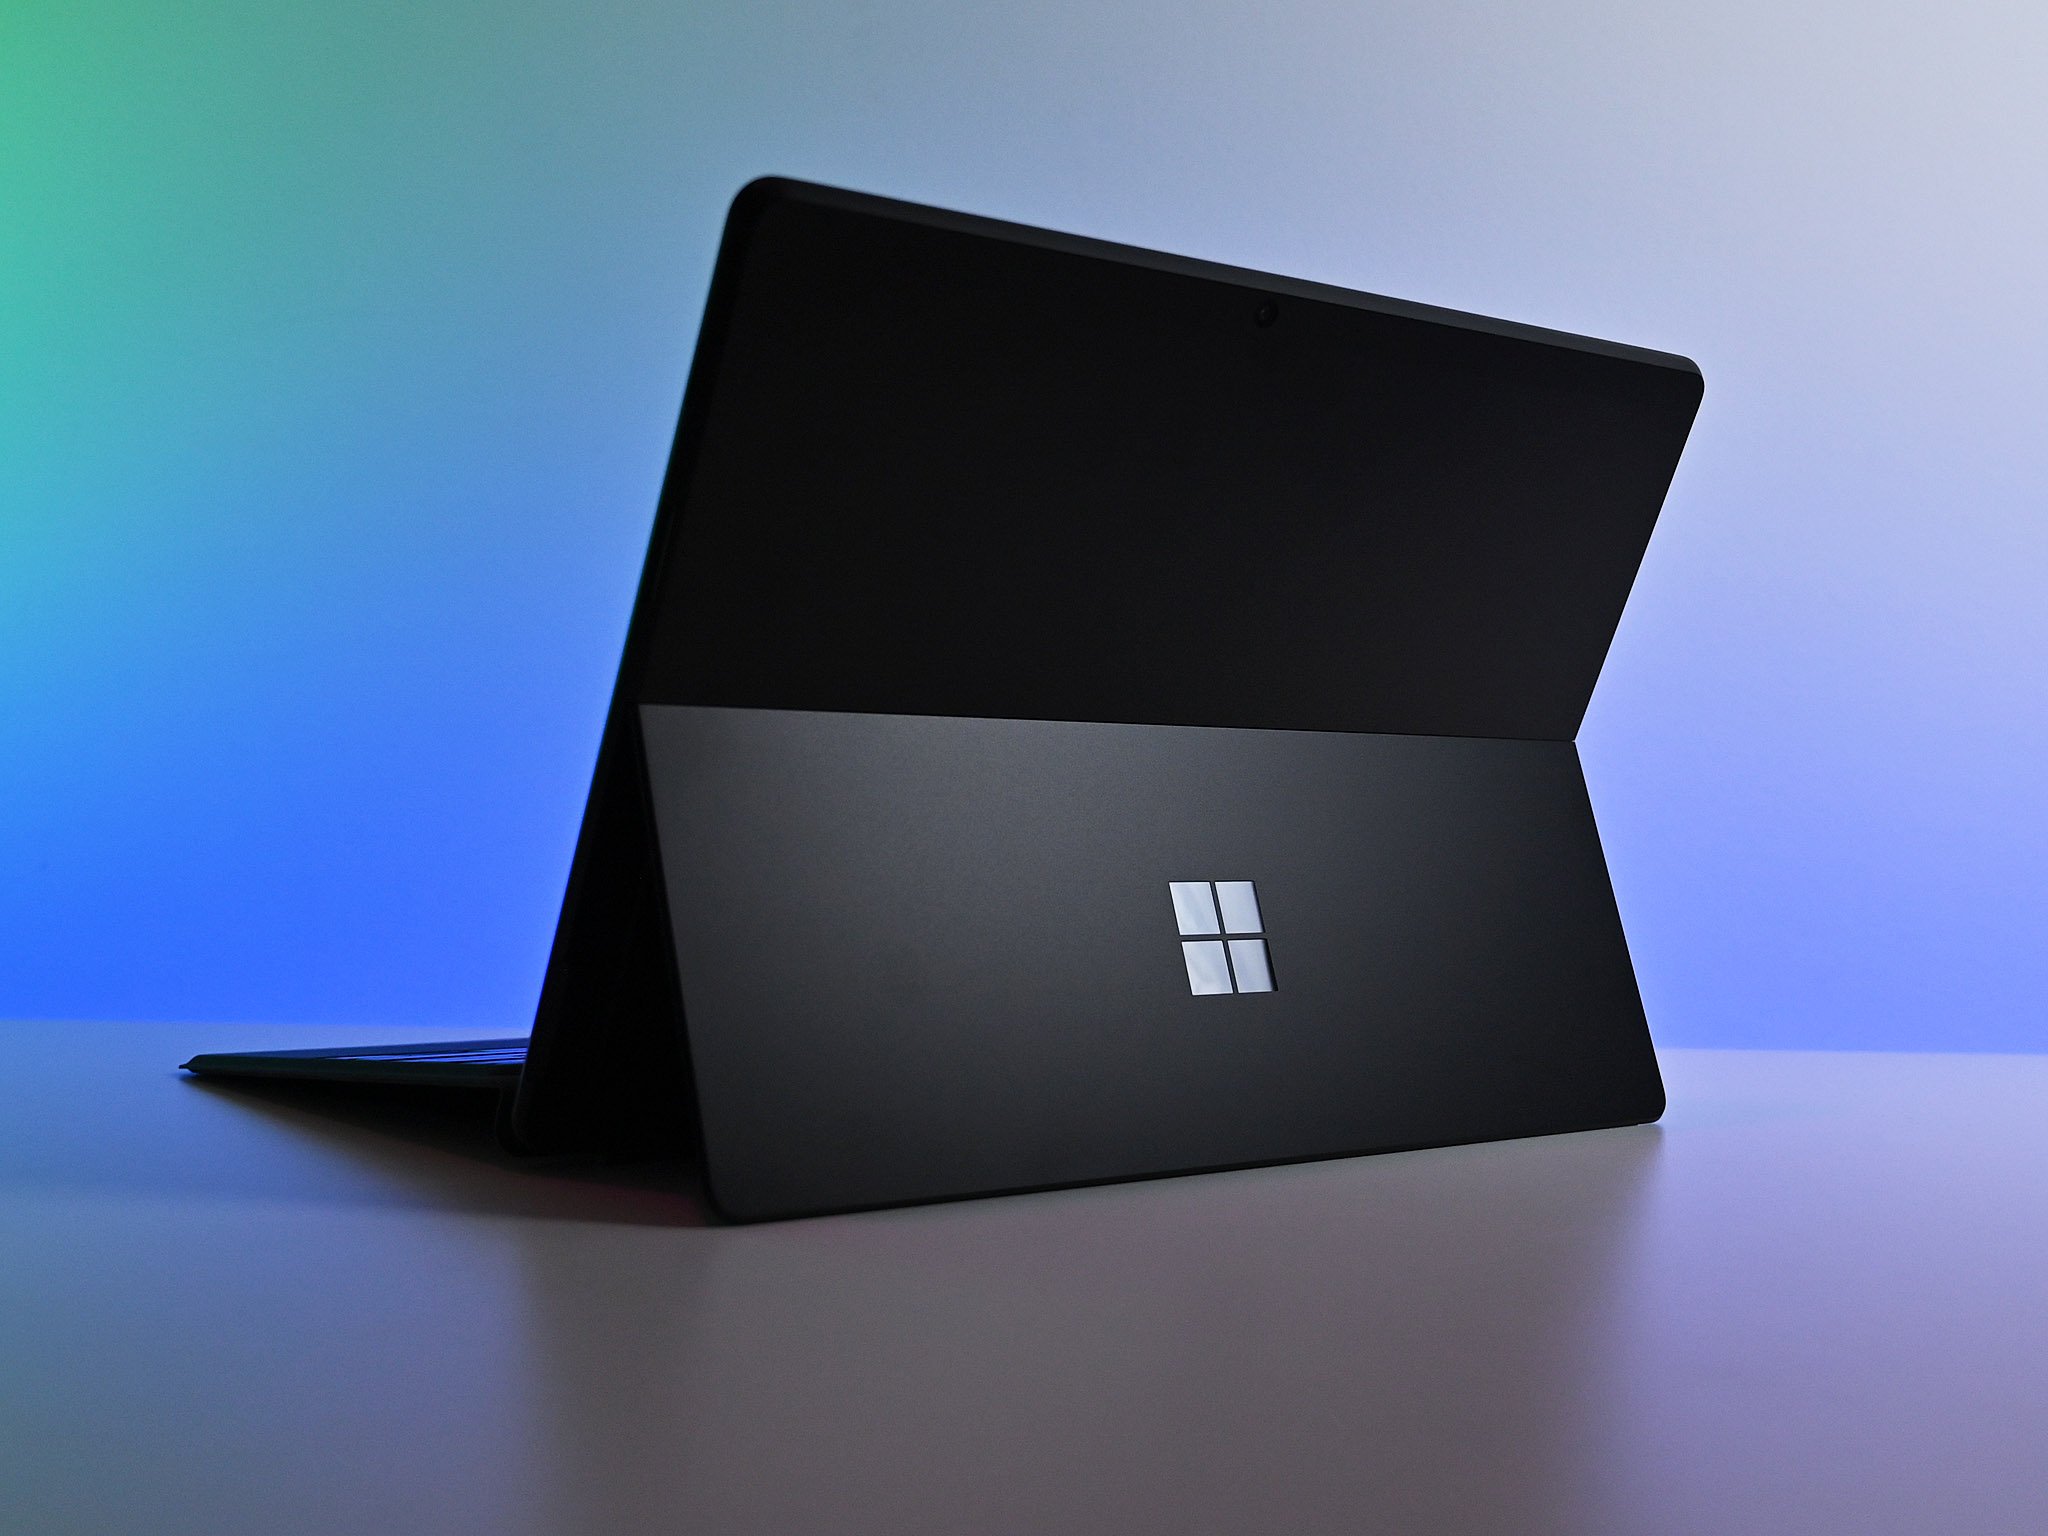 Check out Windows 11 on the Surface Pro X | Windows Central